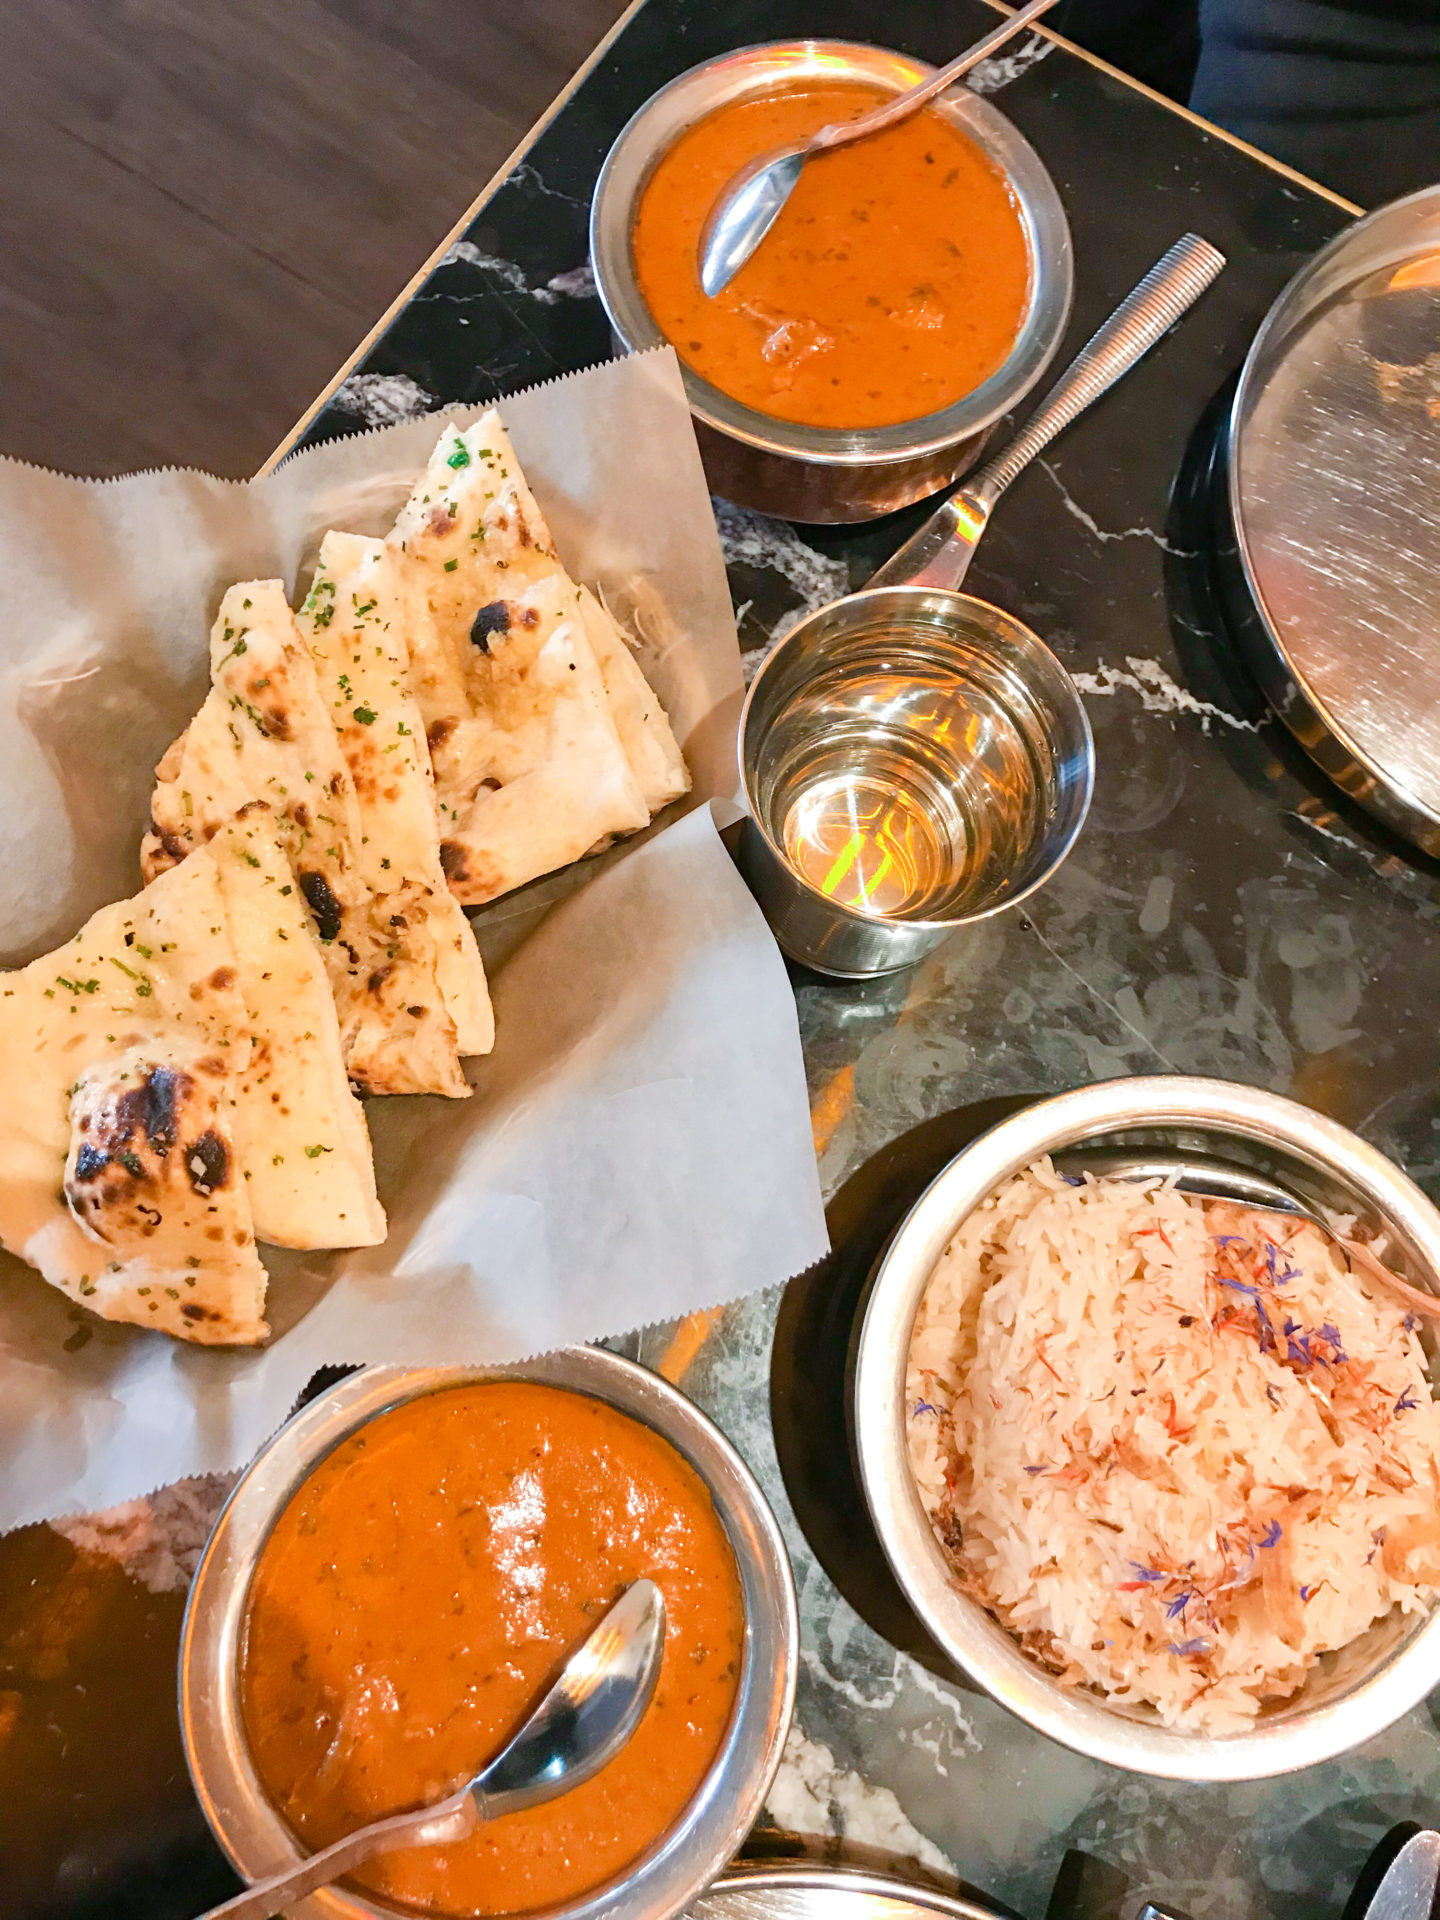 A must read! An NYC restaurant guide featuring all of New York City's best restaurants, from brunch to late night dinners. It even details key dishes to try at each restaurant! BabuJi is one of them!